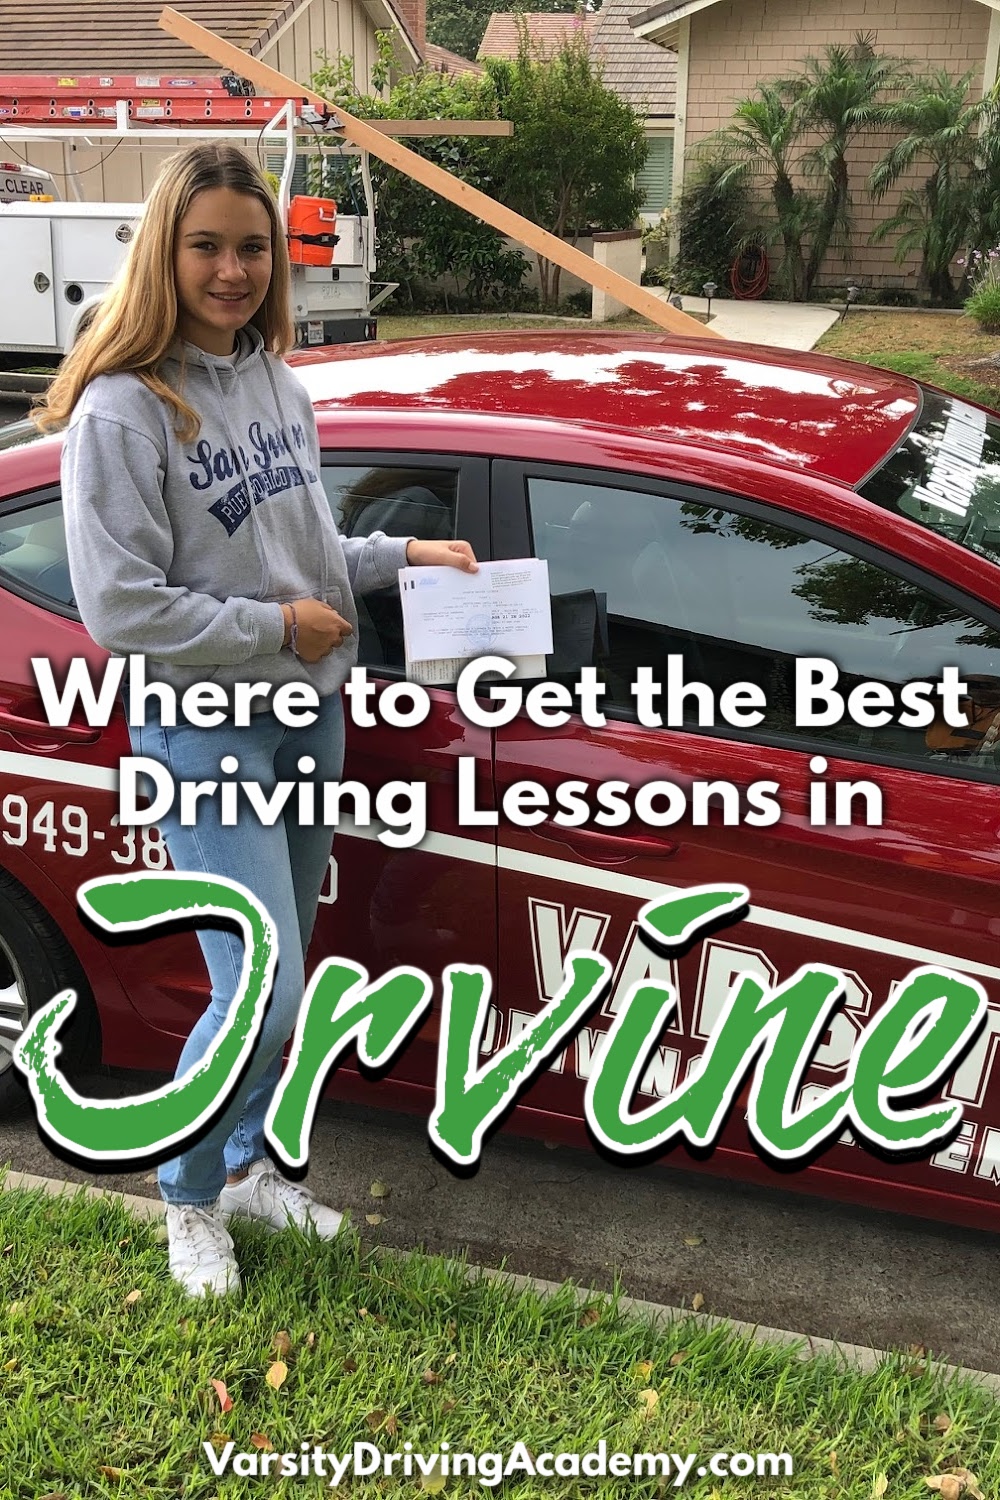 Finding out where the best driving lessons in Irvine are will help you learn to drive in Irvine with safe practices and better habits.